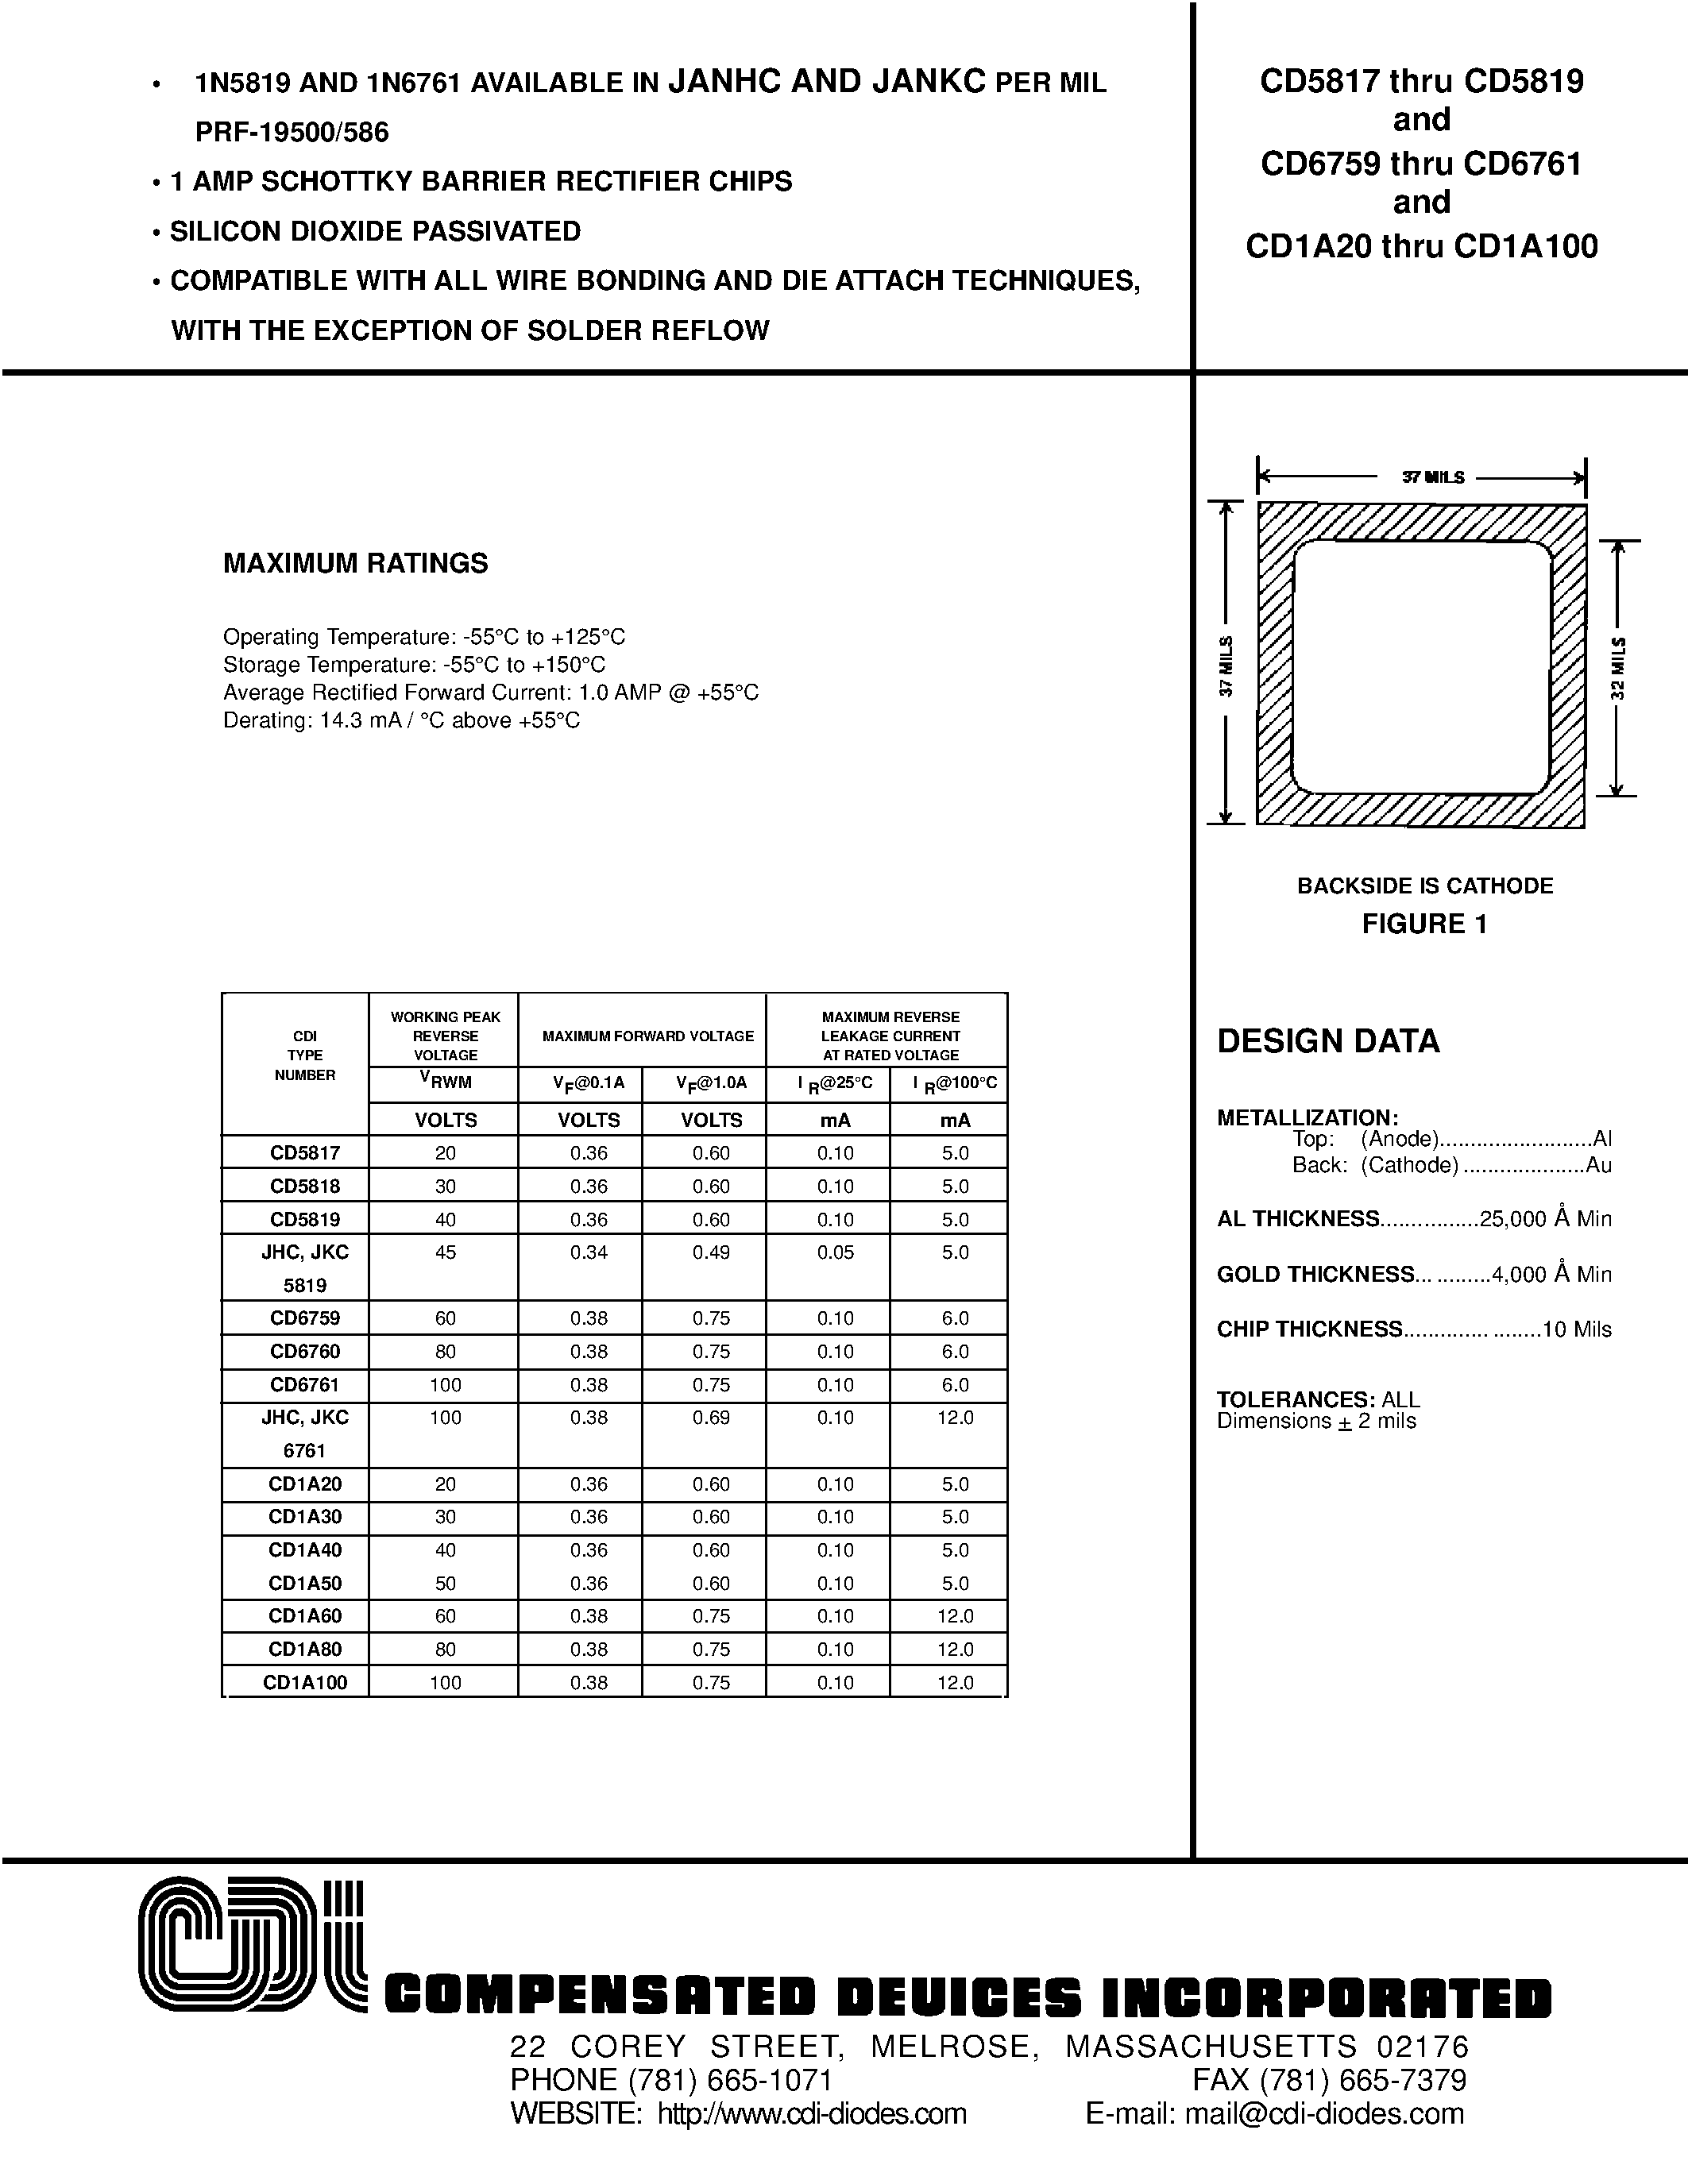 Datasheet CD1A60 - 1 AMP SCHOTTKY BARRIER RECTIFIER CHIPS page 1